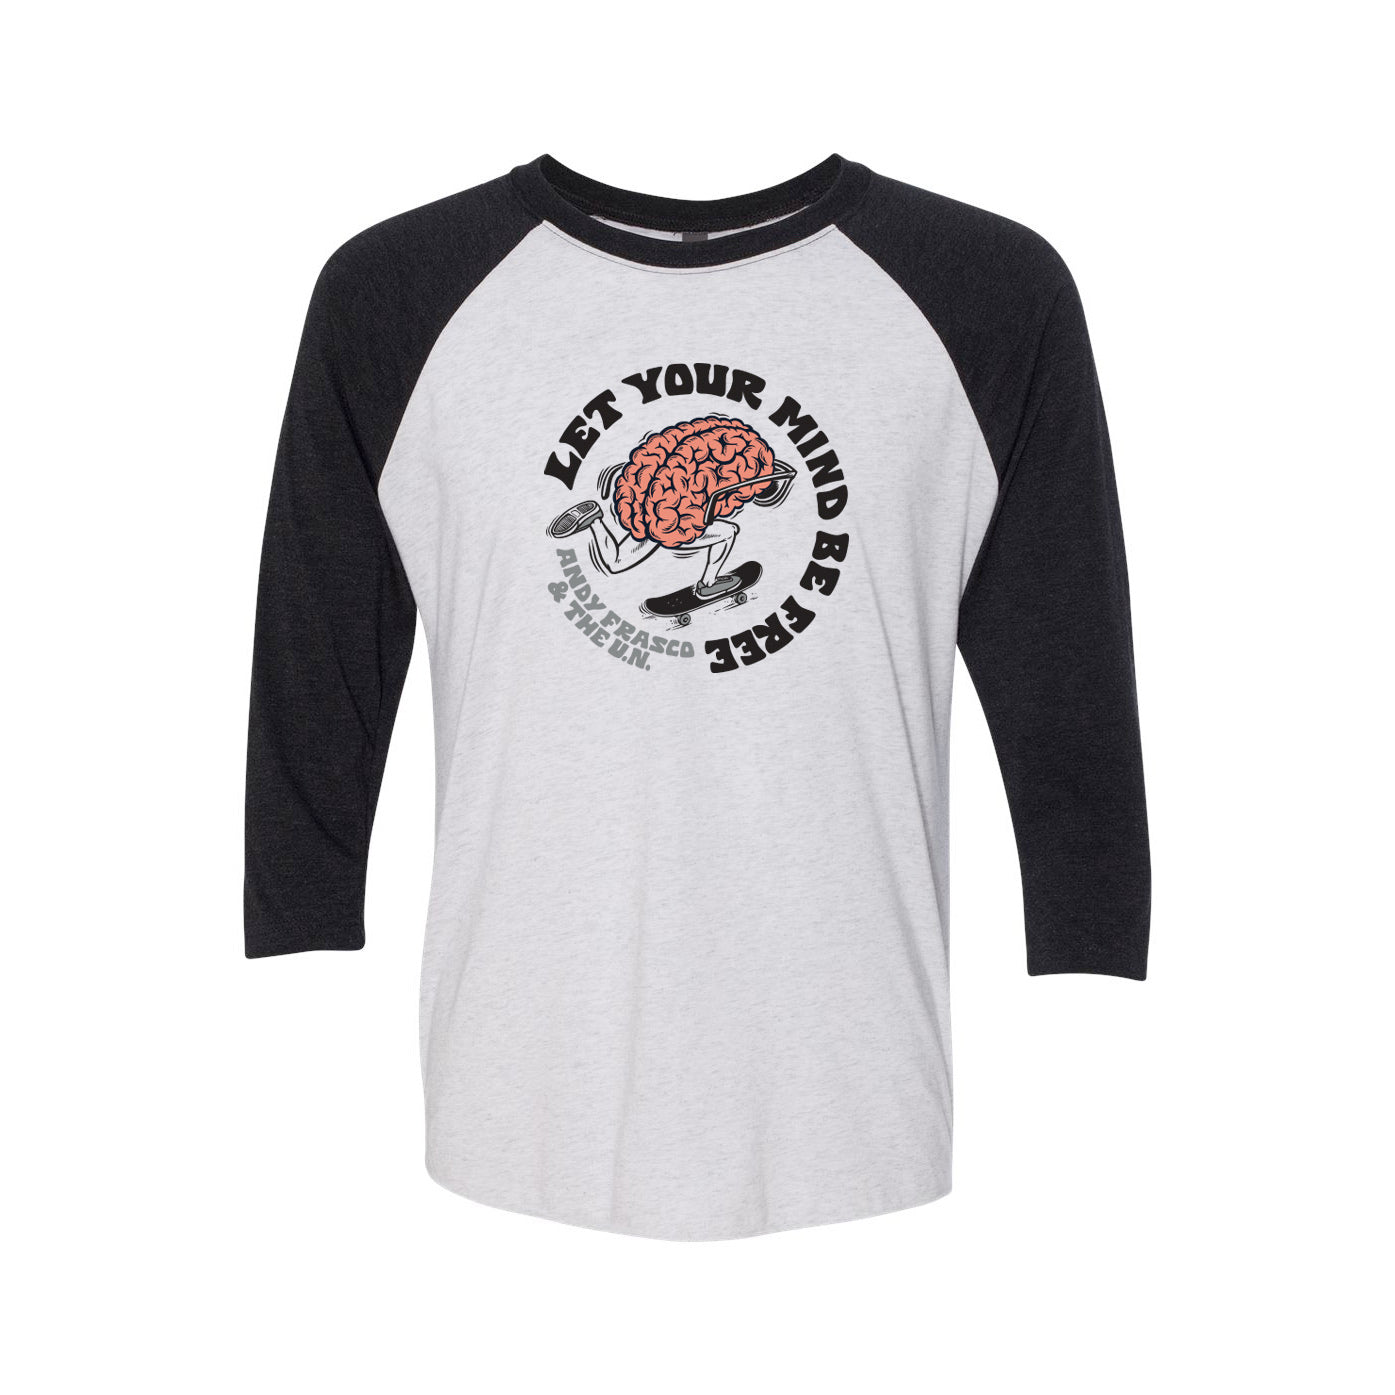 Andy Frasco | Let Your Mind Be Free Raglan